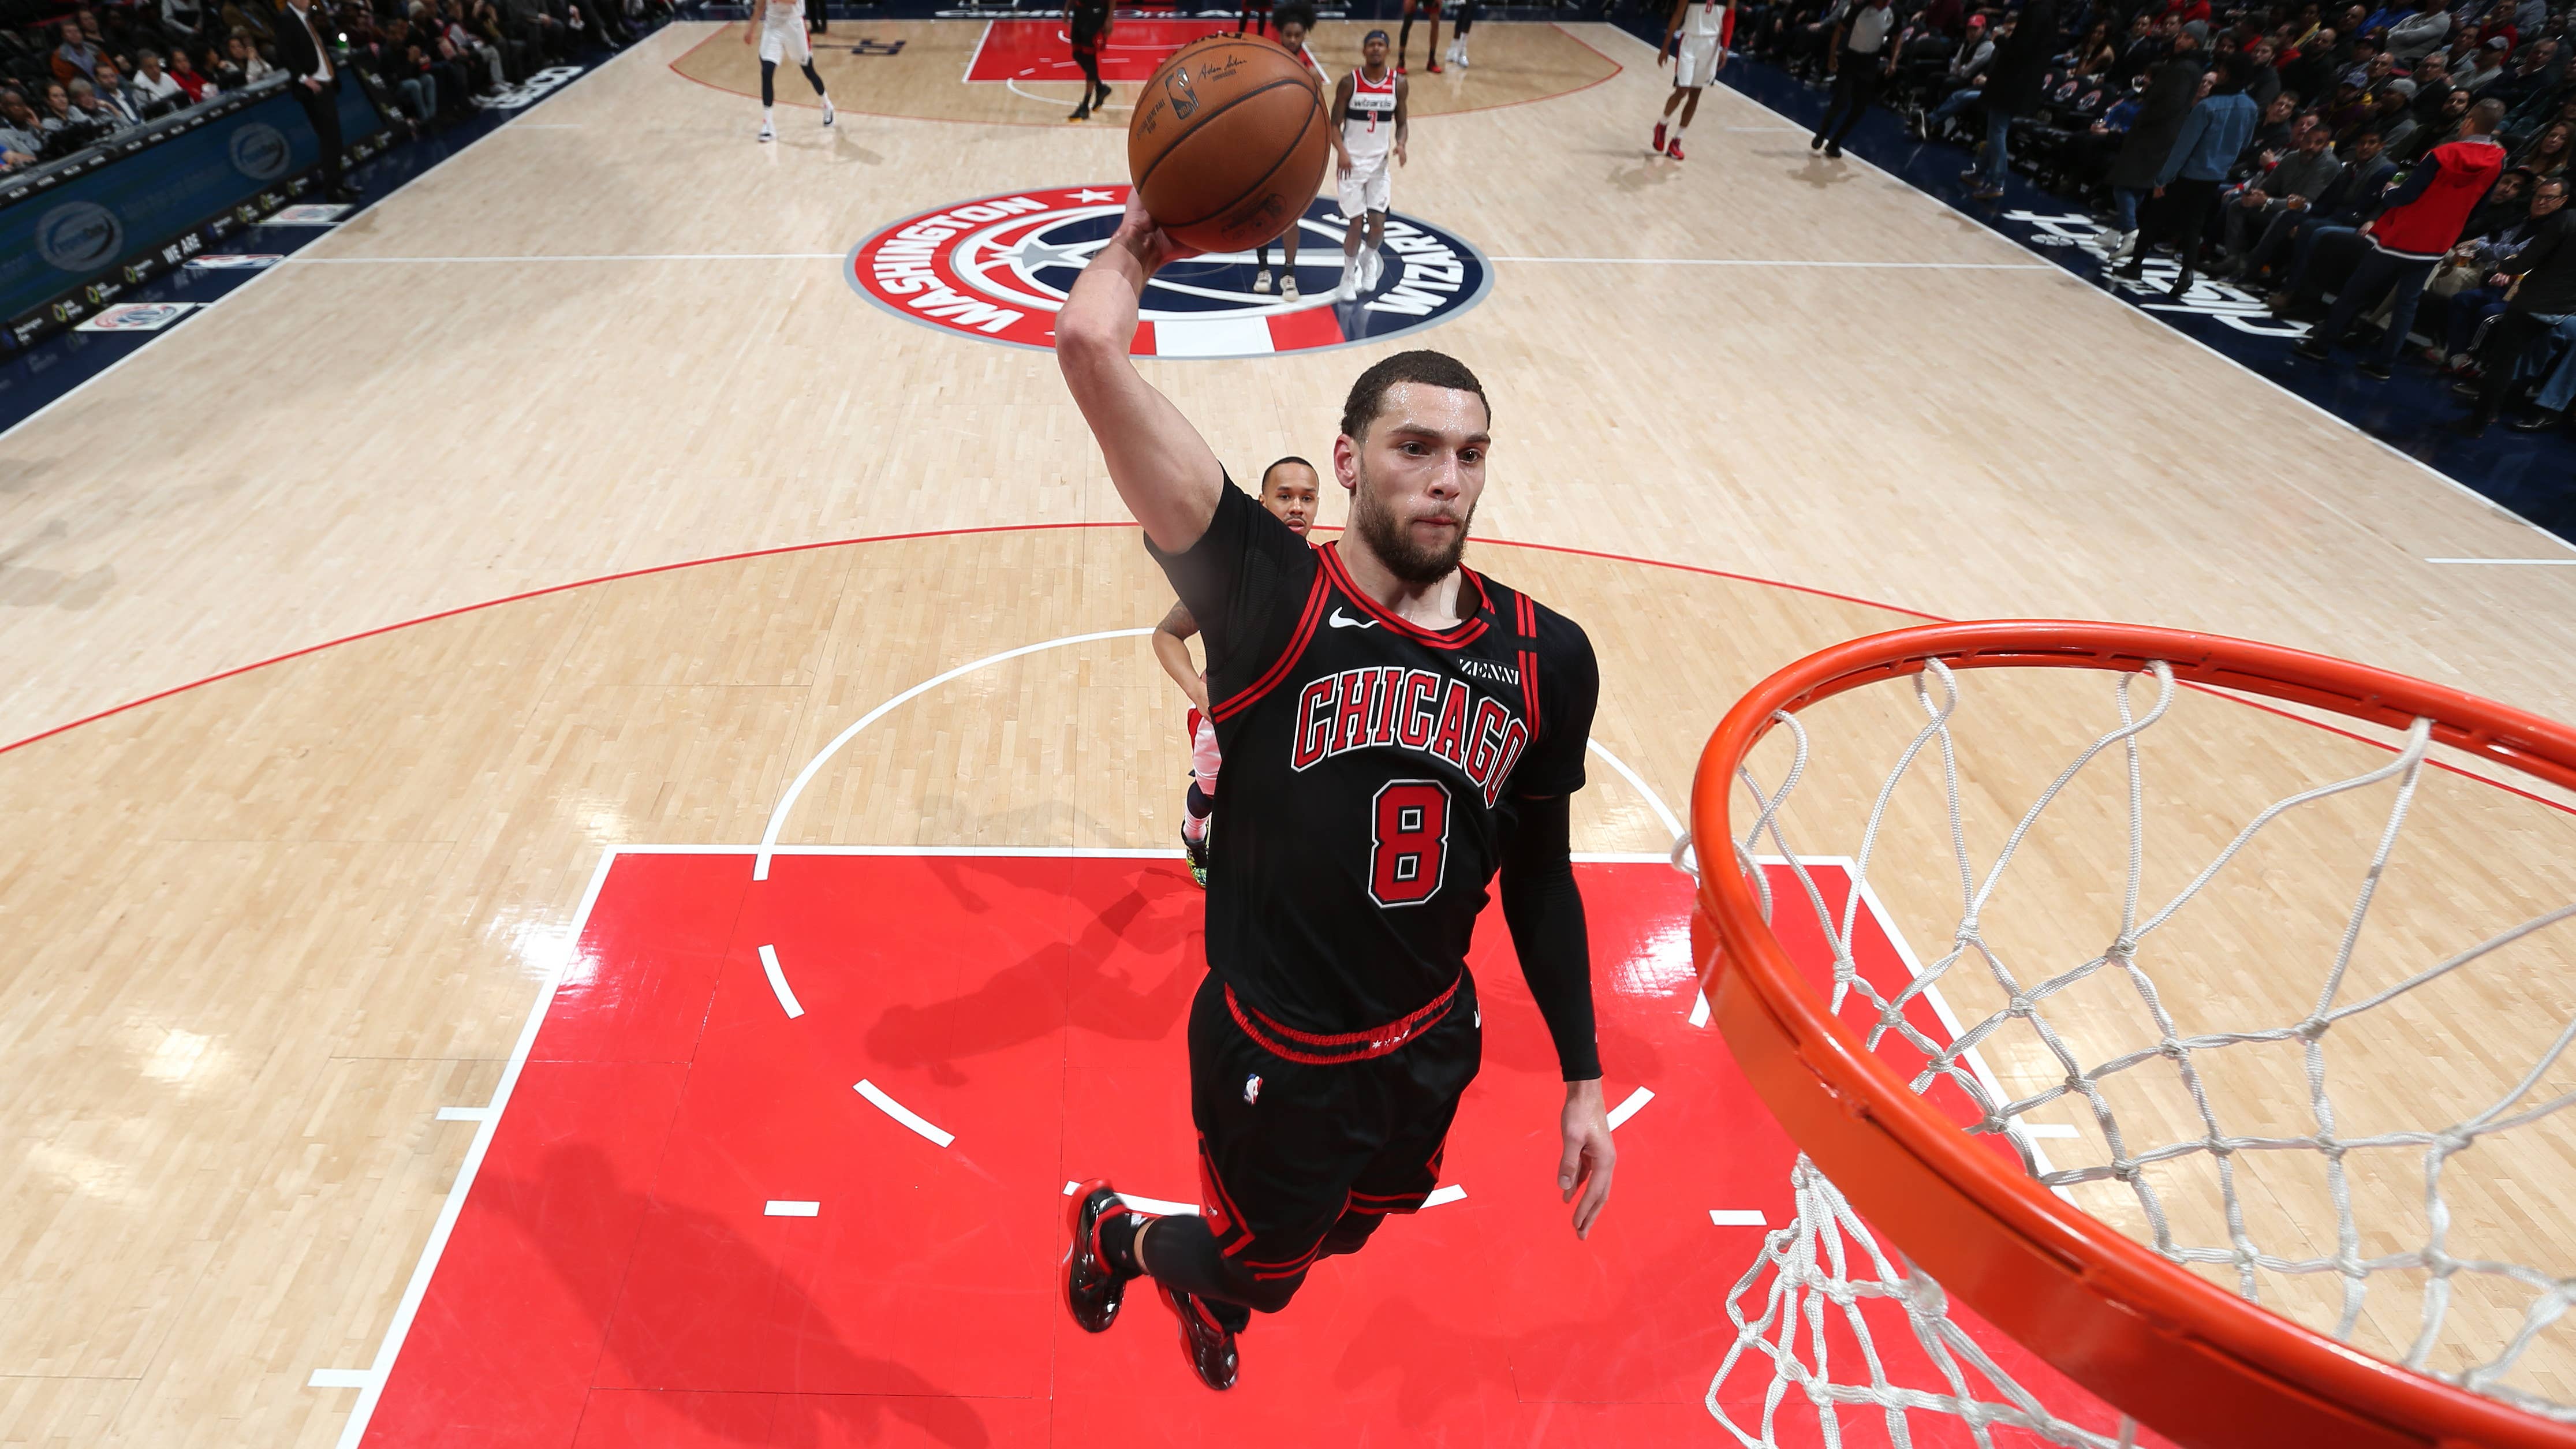 Zach LaVine #8 of the Chicago Bulls dunks the ball during the game against the Washington Wizards on February 11, 2020 at Capital One Arena in Washington, DC.